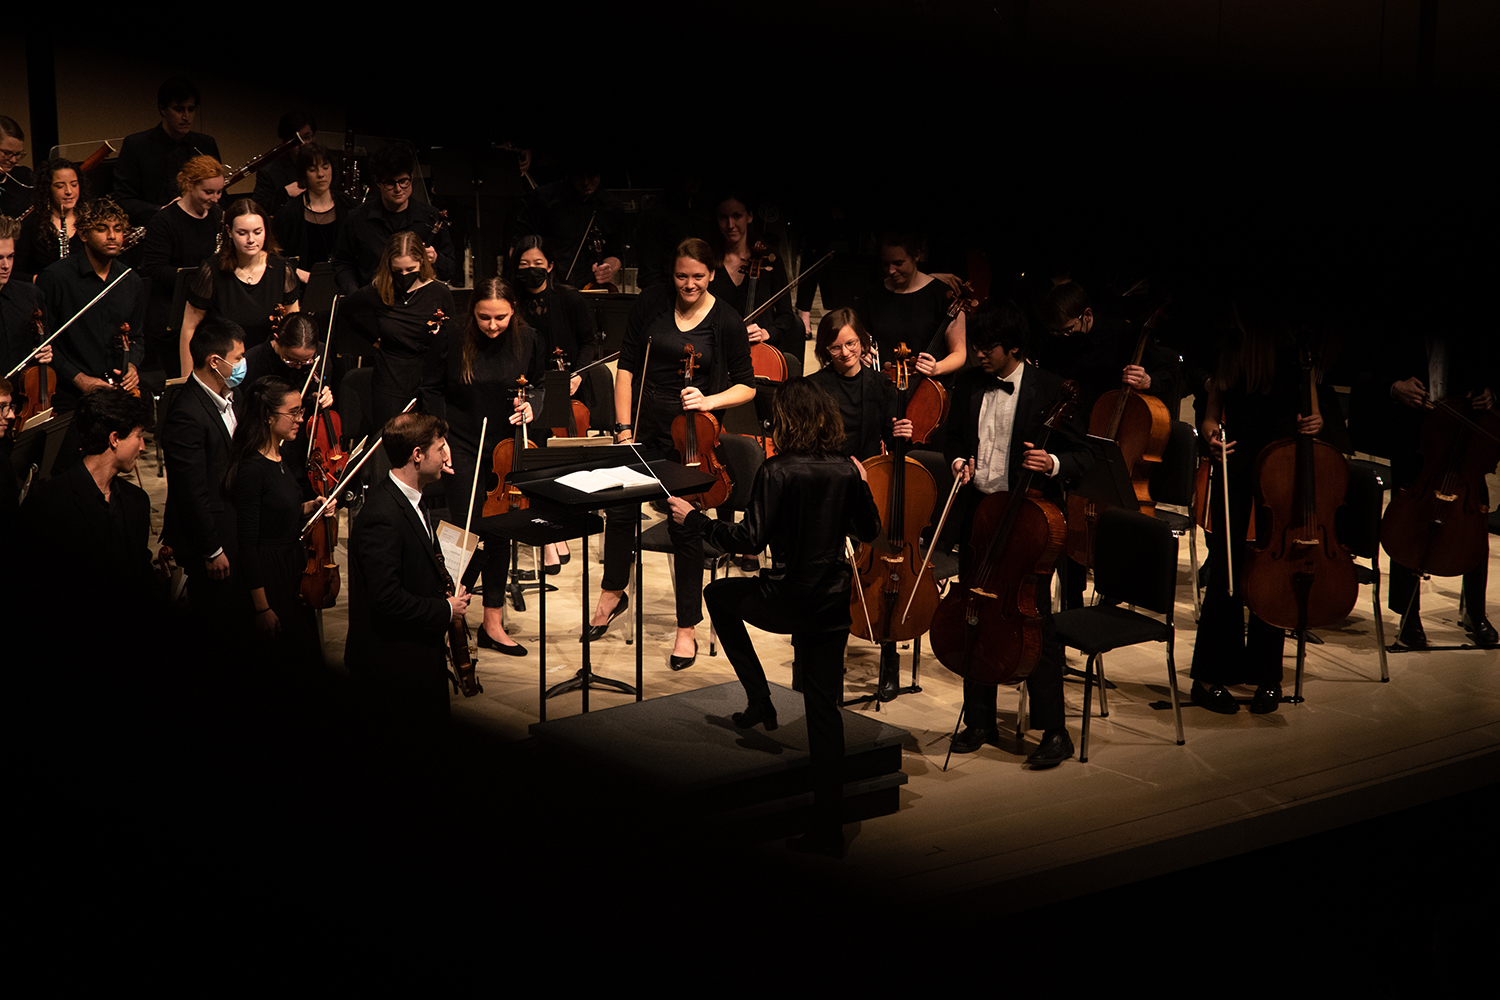 UI symphony orchestra's first performance of the year kicks off